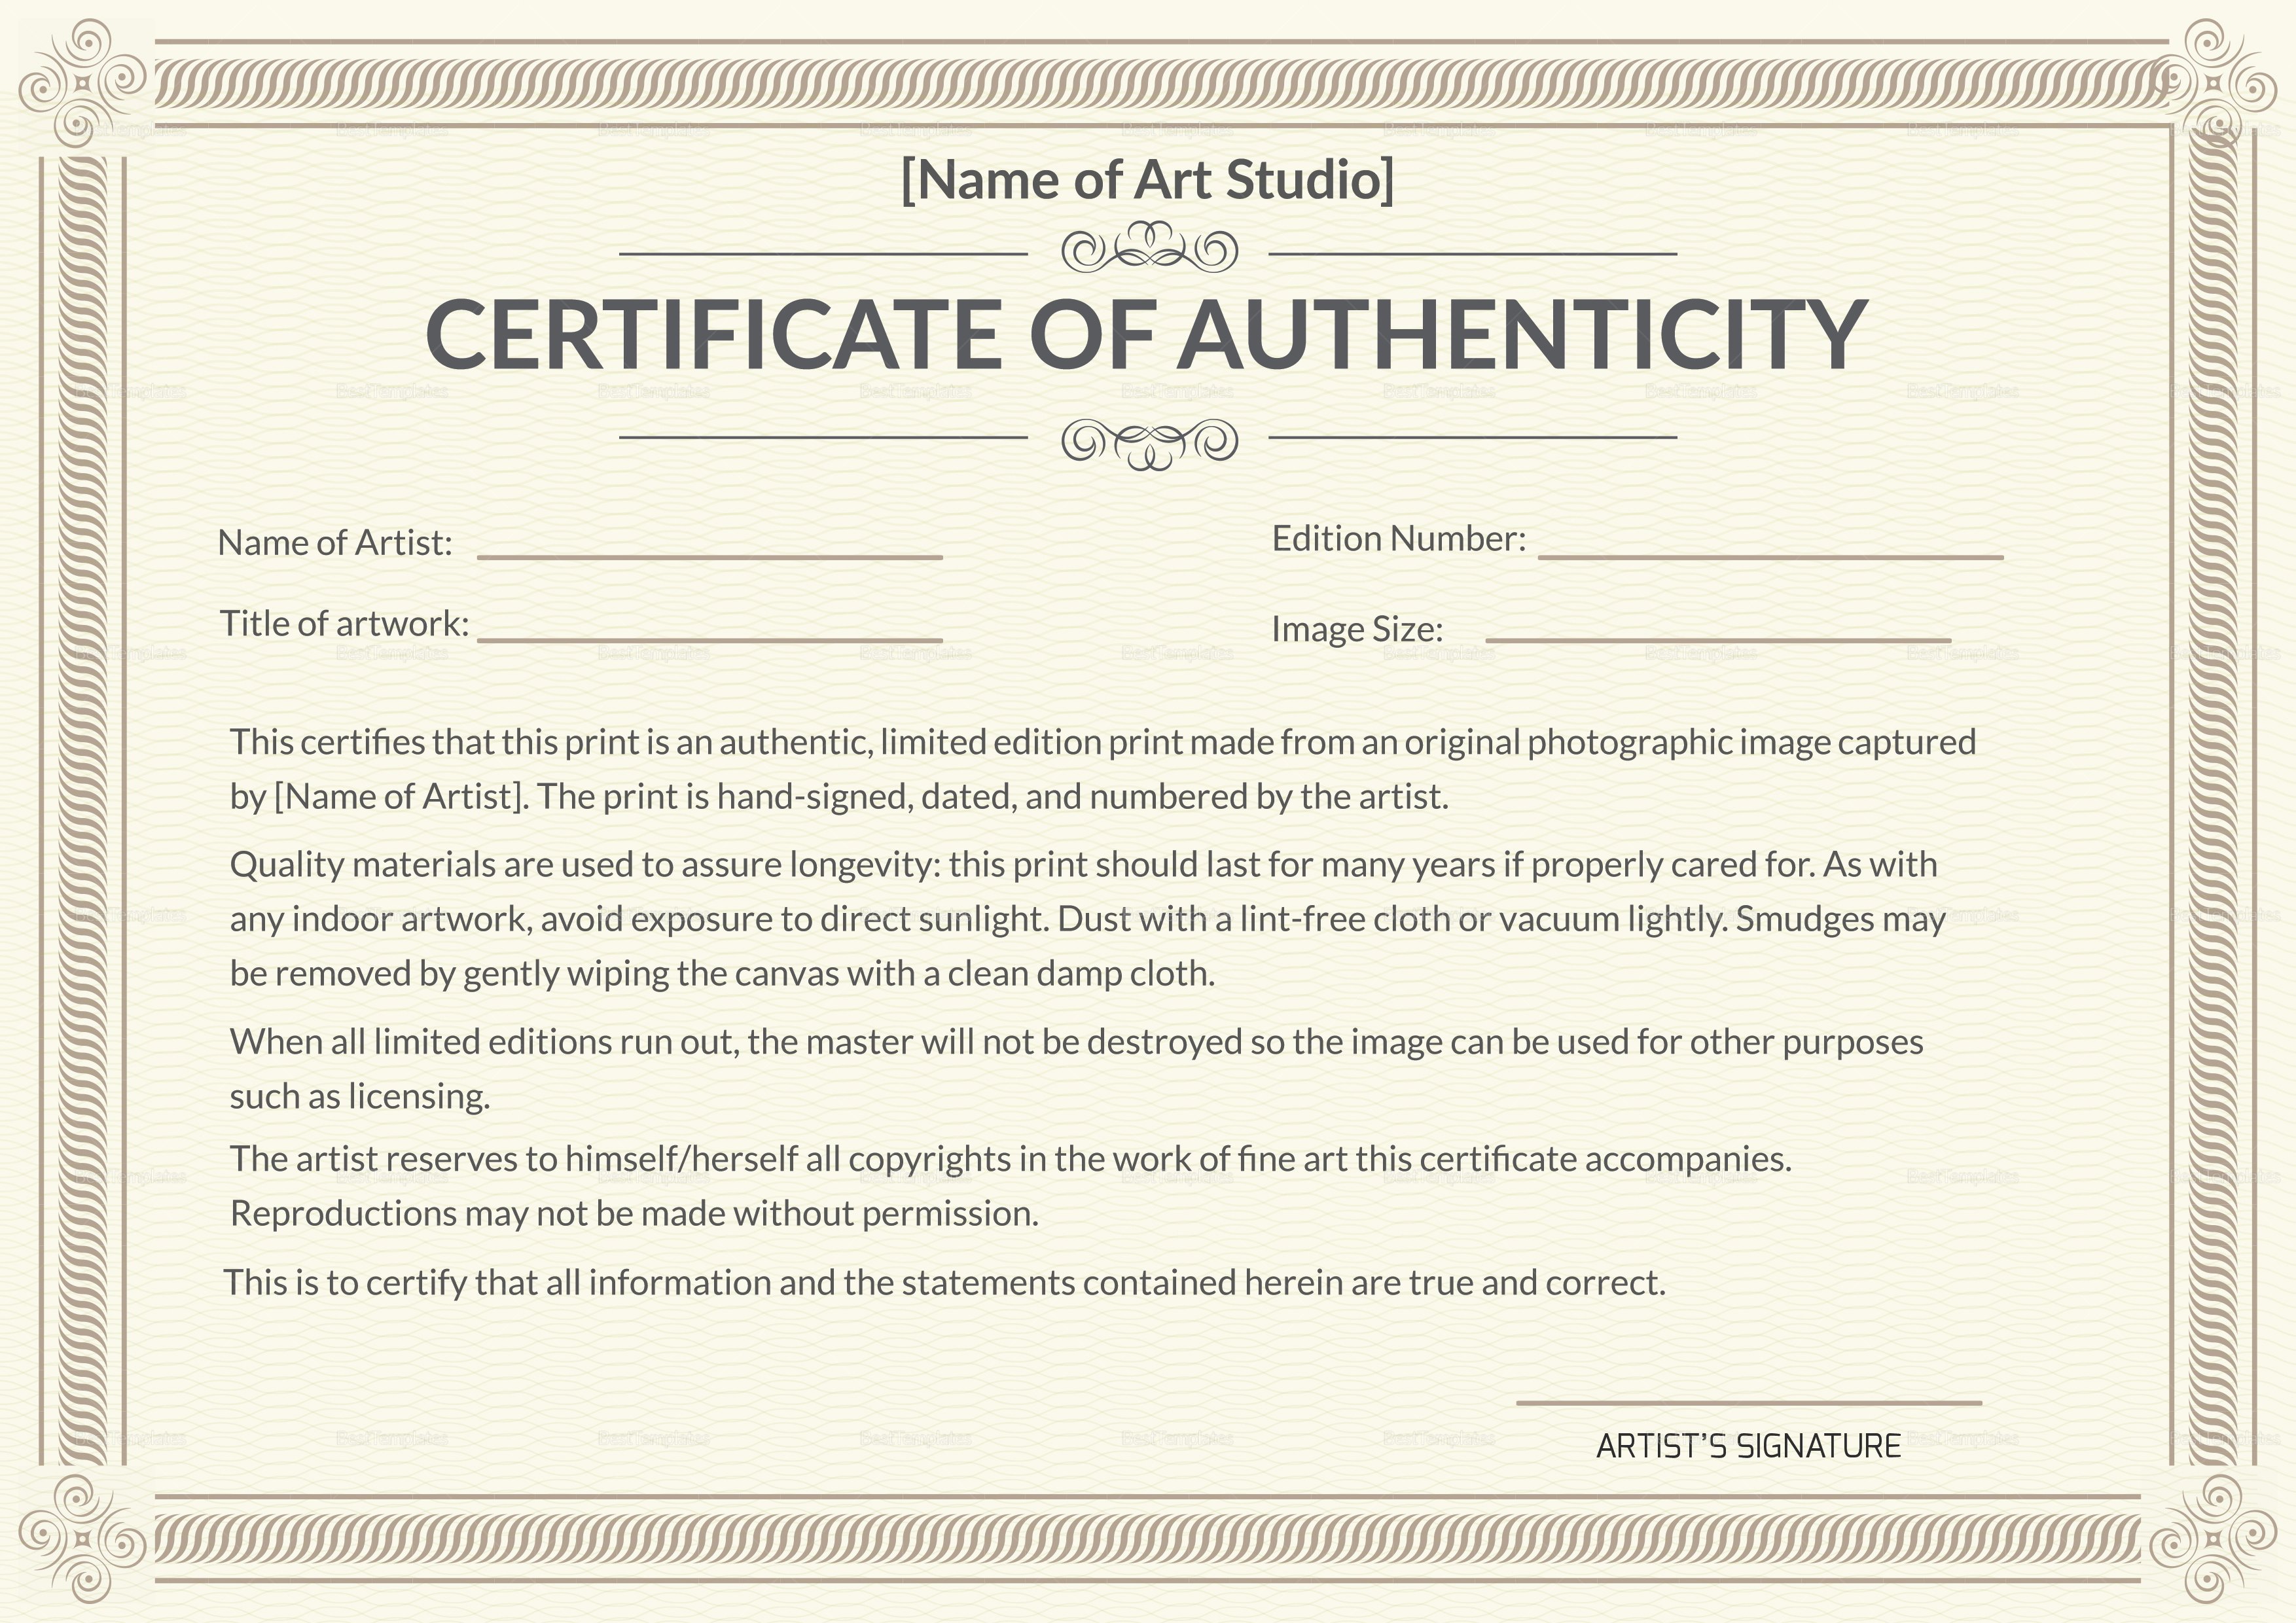 Certificate Of Authenticity Template Elegant Printable Authenticity Certificate Design Template In Psd